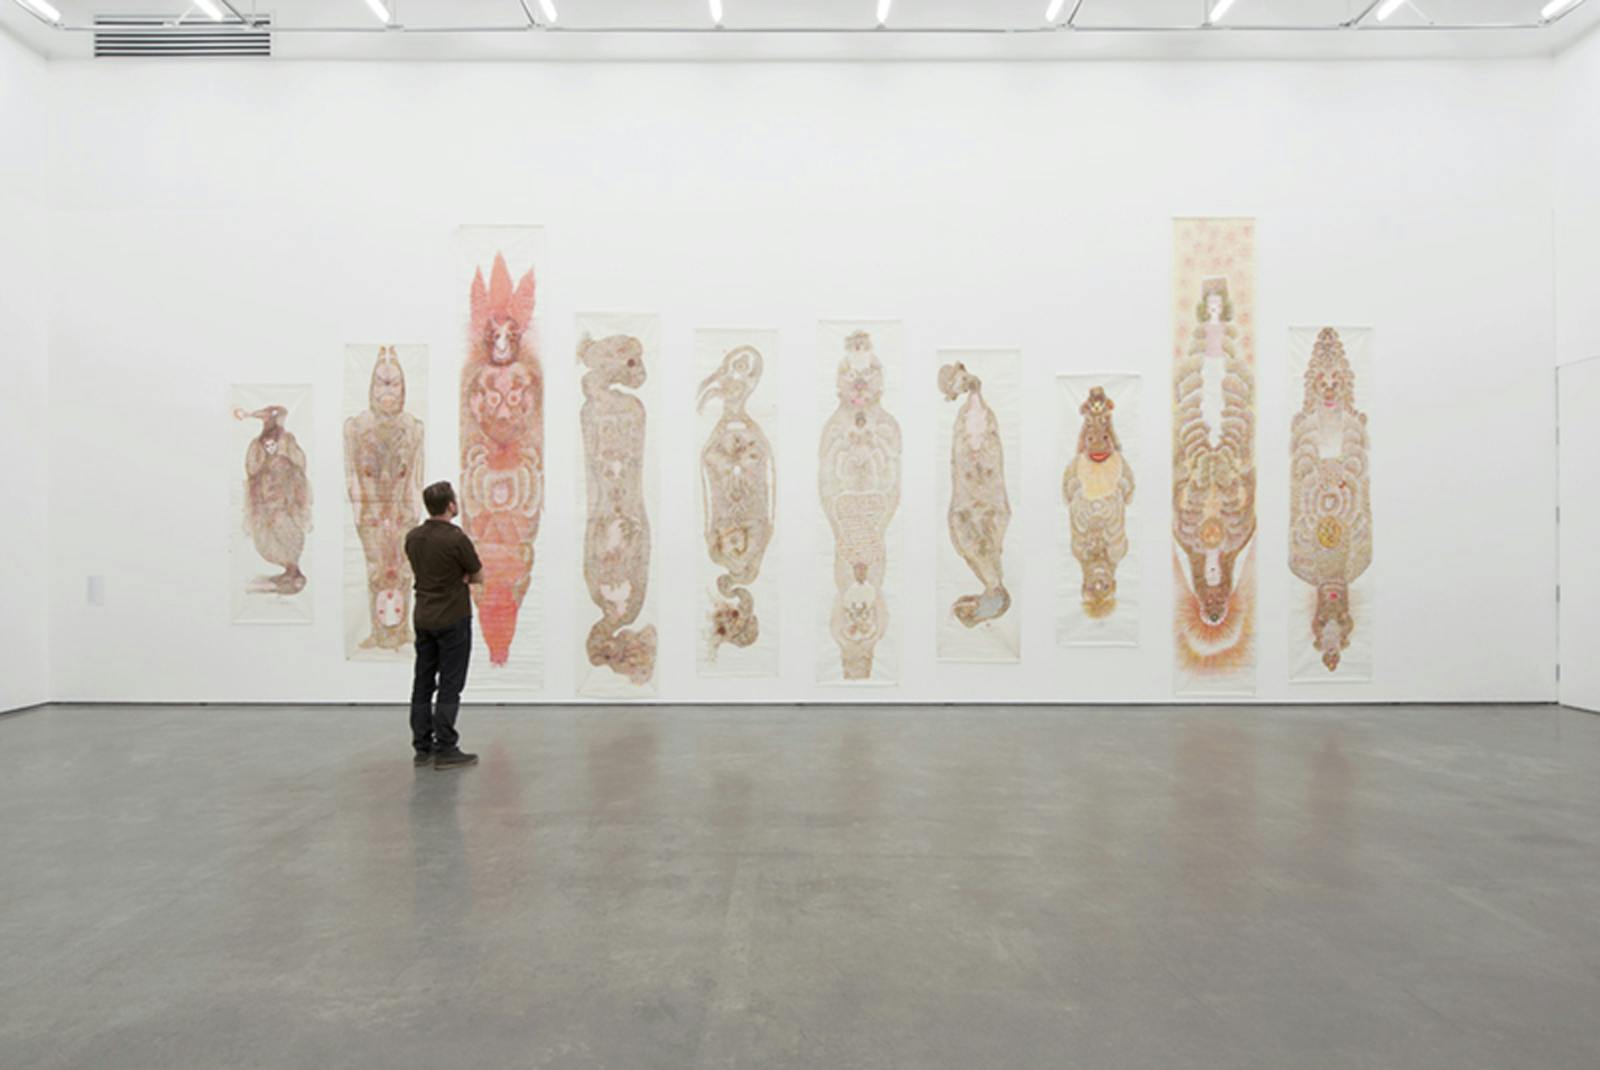 Ten drawings by Guo Fengyi on long, narrow sheets of paper larger than human scale installed in a gallery. The images resemble imaginary human, animal or mythical figures.